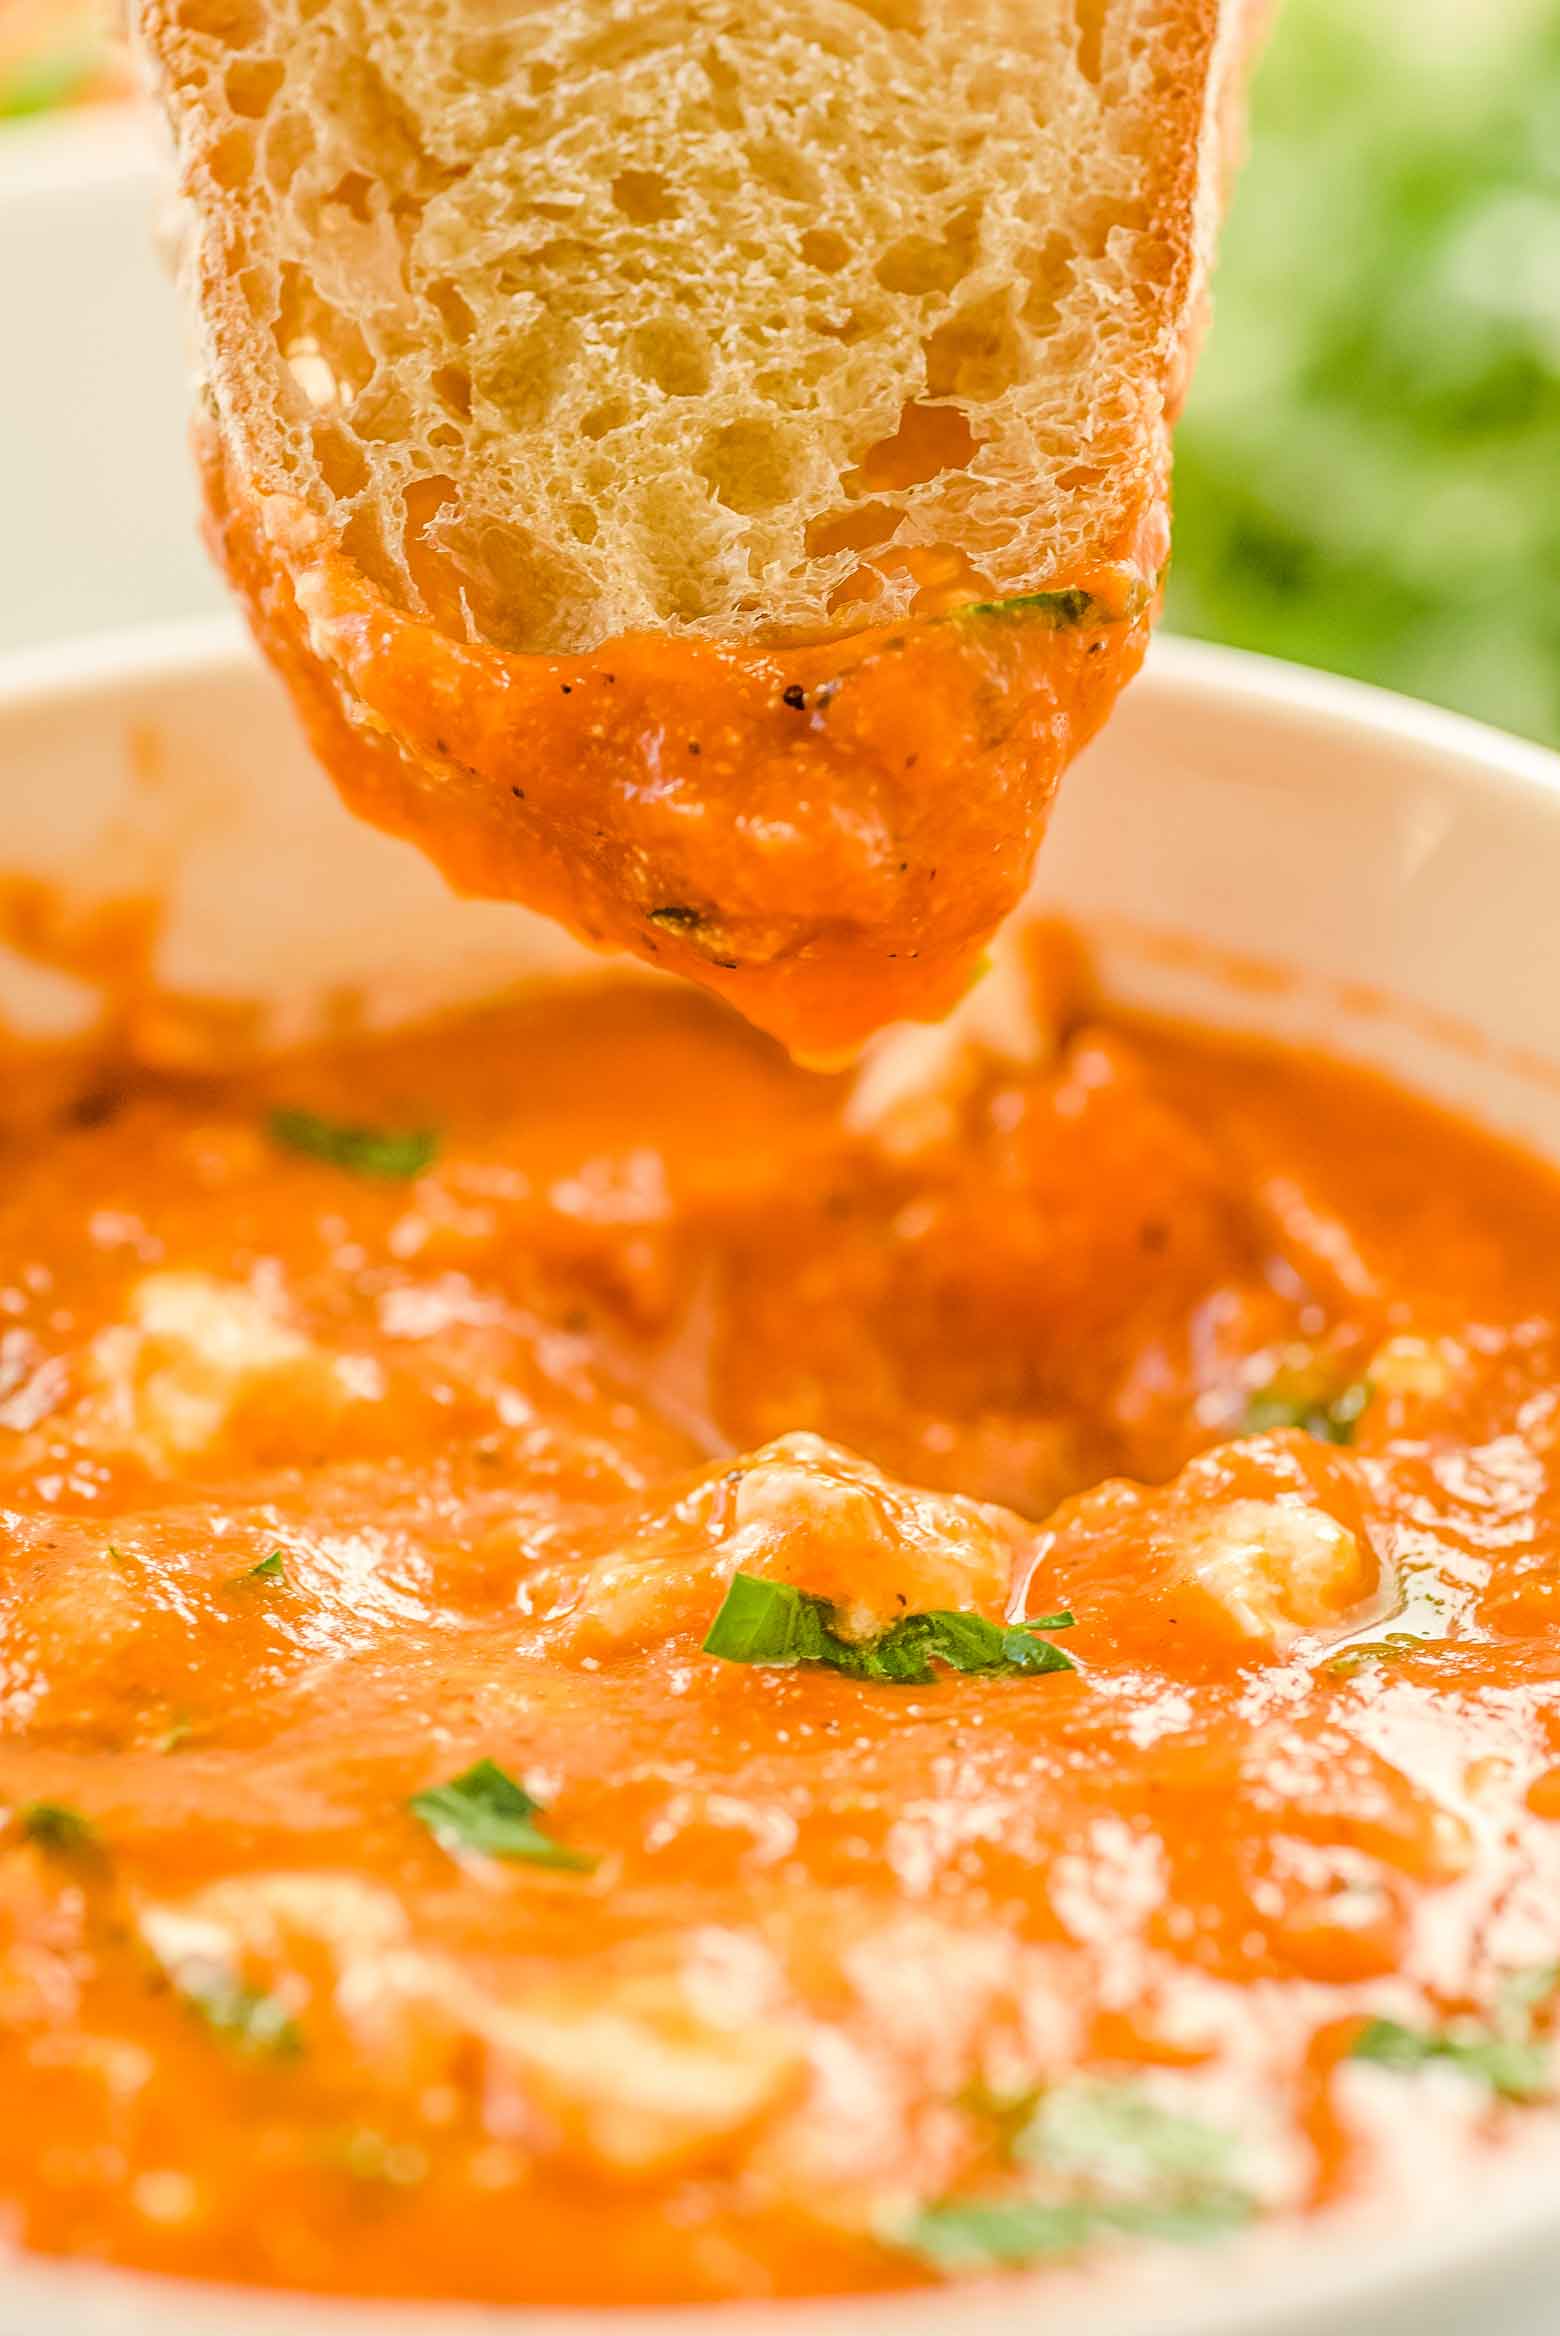 Roasted red pepper tomato soup is a warm, healthy, and hearty meal on a cold winters night. Roasted red peppers and lentils loaded with protein, vitamins and minerals will leave your body happy, while the taste will leave your taste buds happy.  Made in an Instant Pot or other pressure cooker, it's ready to go in just 30 minutes. Puree it to make it a bisque or leave chunky- the choice is yours! via @mrsmajorhoff